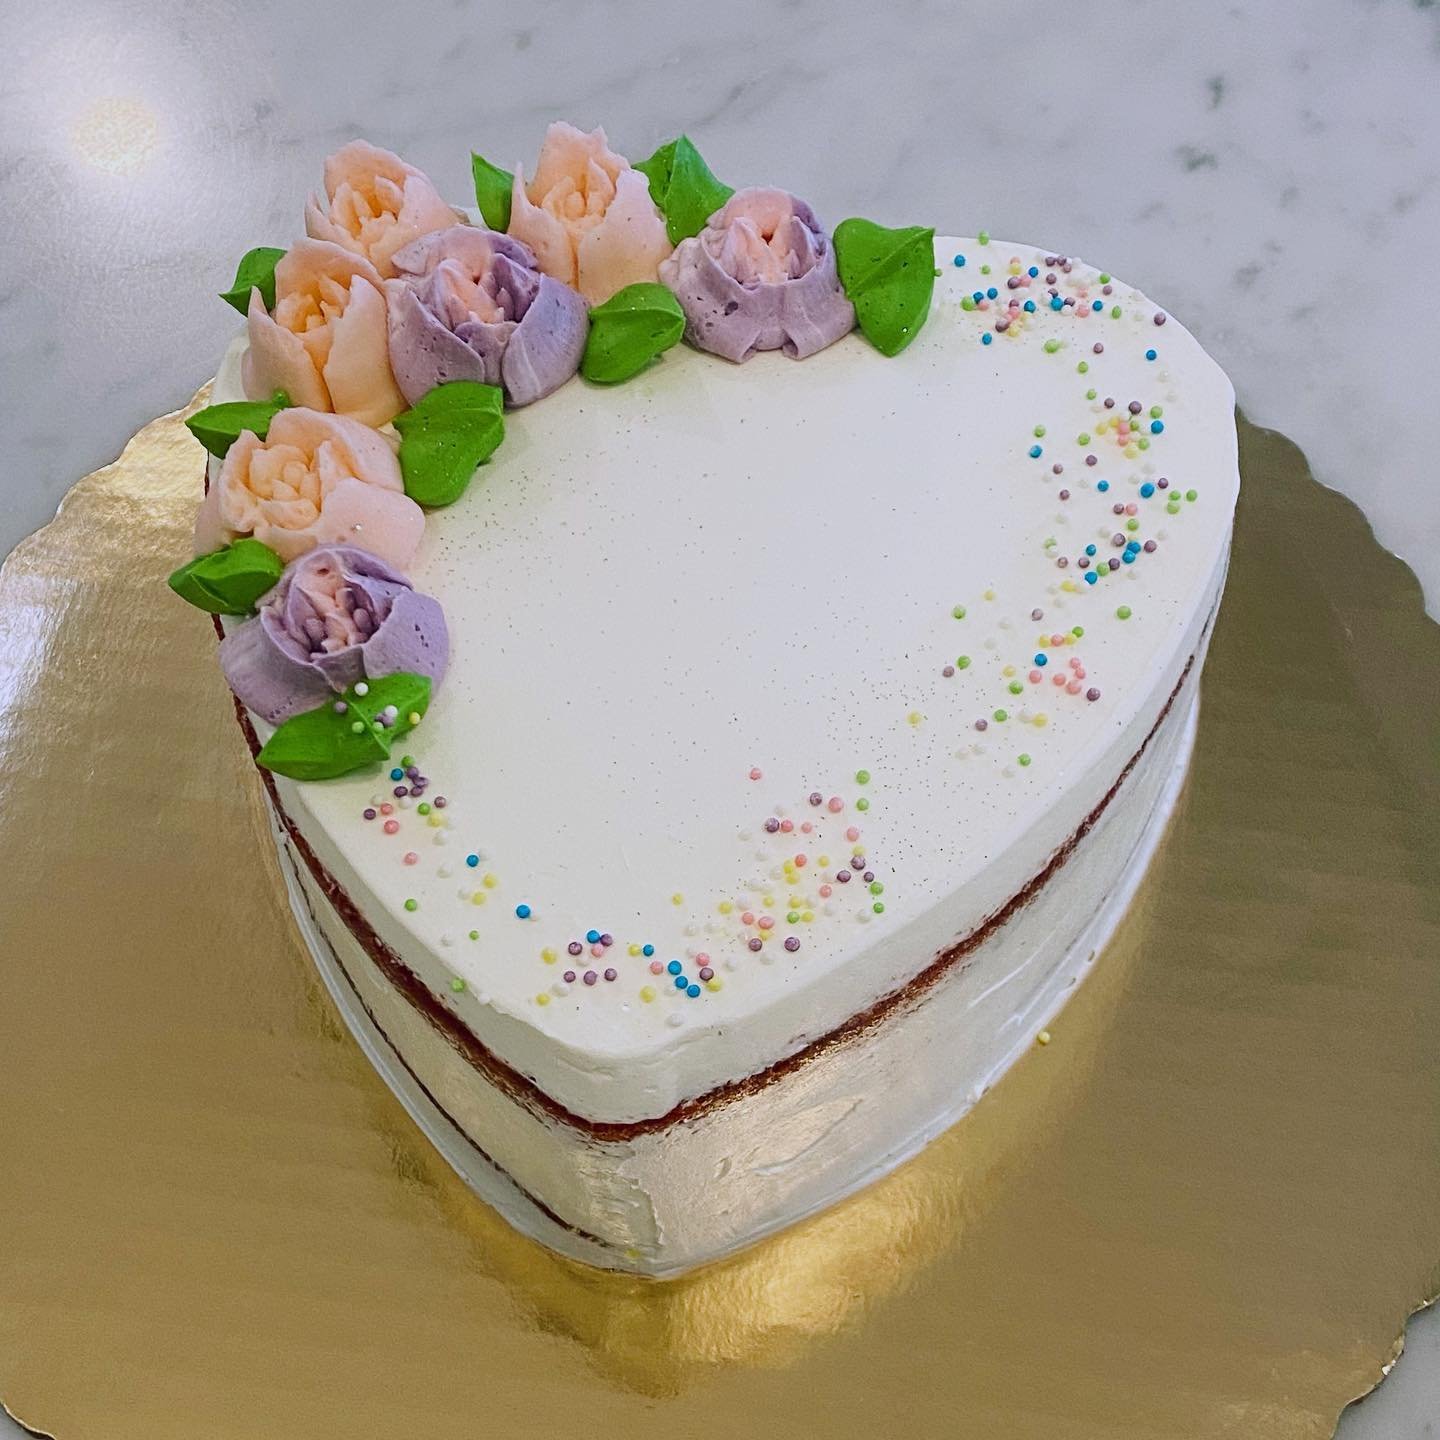 Reminder: closed Sunday, don&rsquo;t forget to stop by for your Mother&rsquo;s Day desserts!💐

#sweetandflour #secaucus #nj #njbakery #jersey #customcakes #cakelife #cupcakes #smallbusiness

#bakery #cake #baking #dessert #pastry #foodporn #instafoo